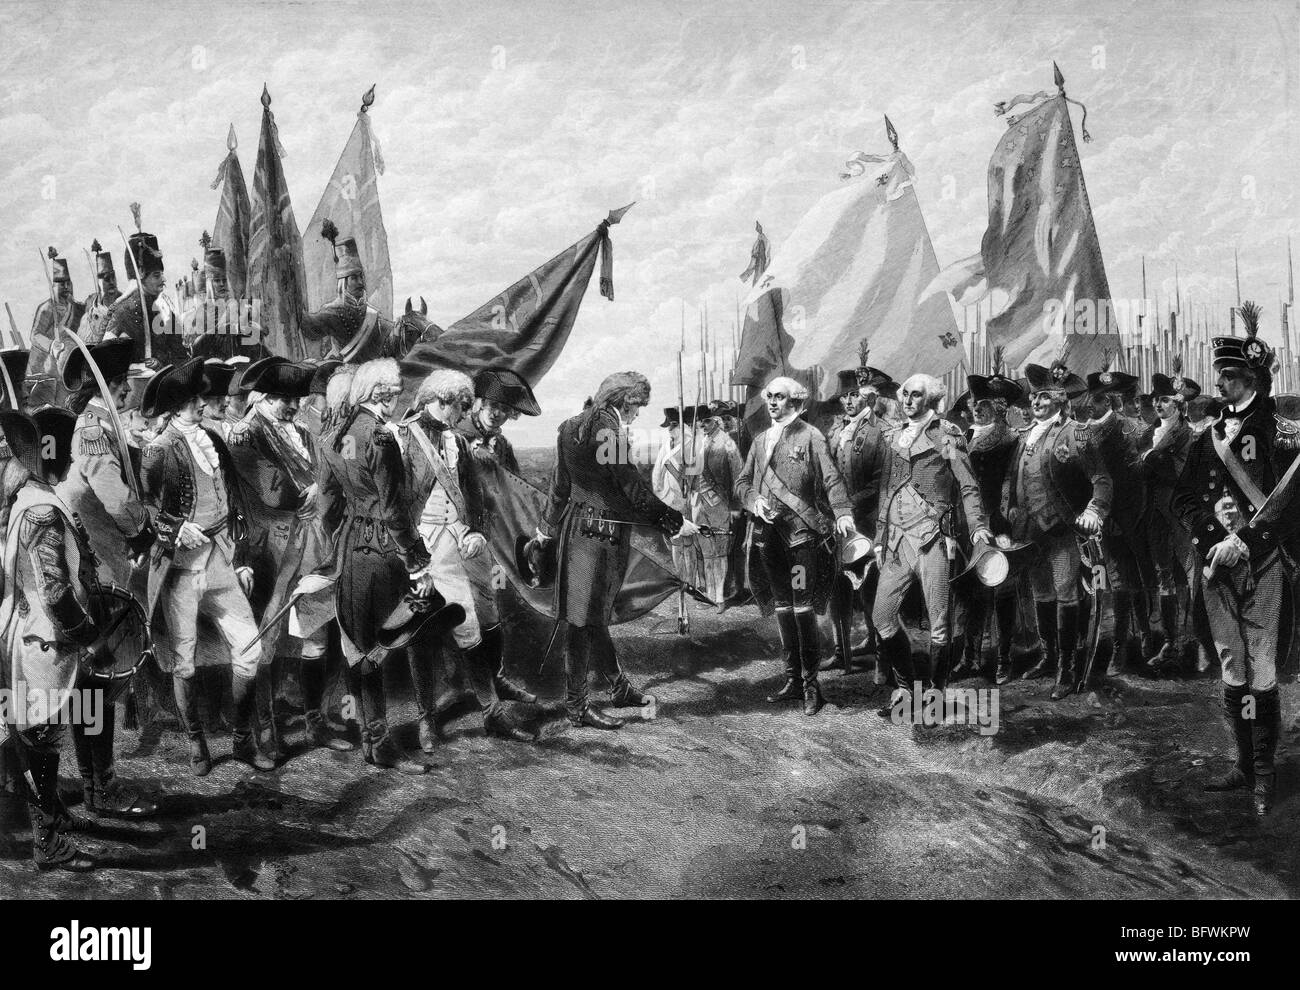 Print showing the surrender of Lord Cornwallis to George Washington and French forces following the siege of Yorktown in 1781. Stock Photo